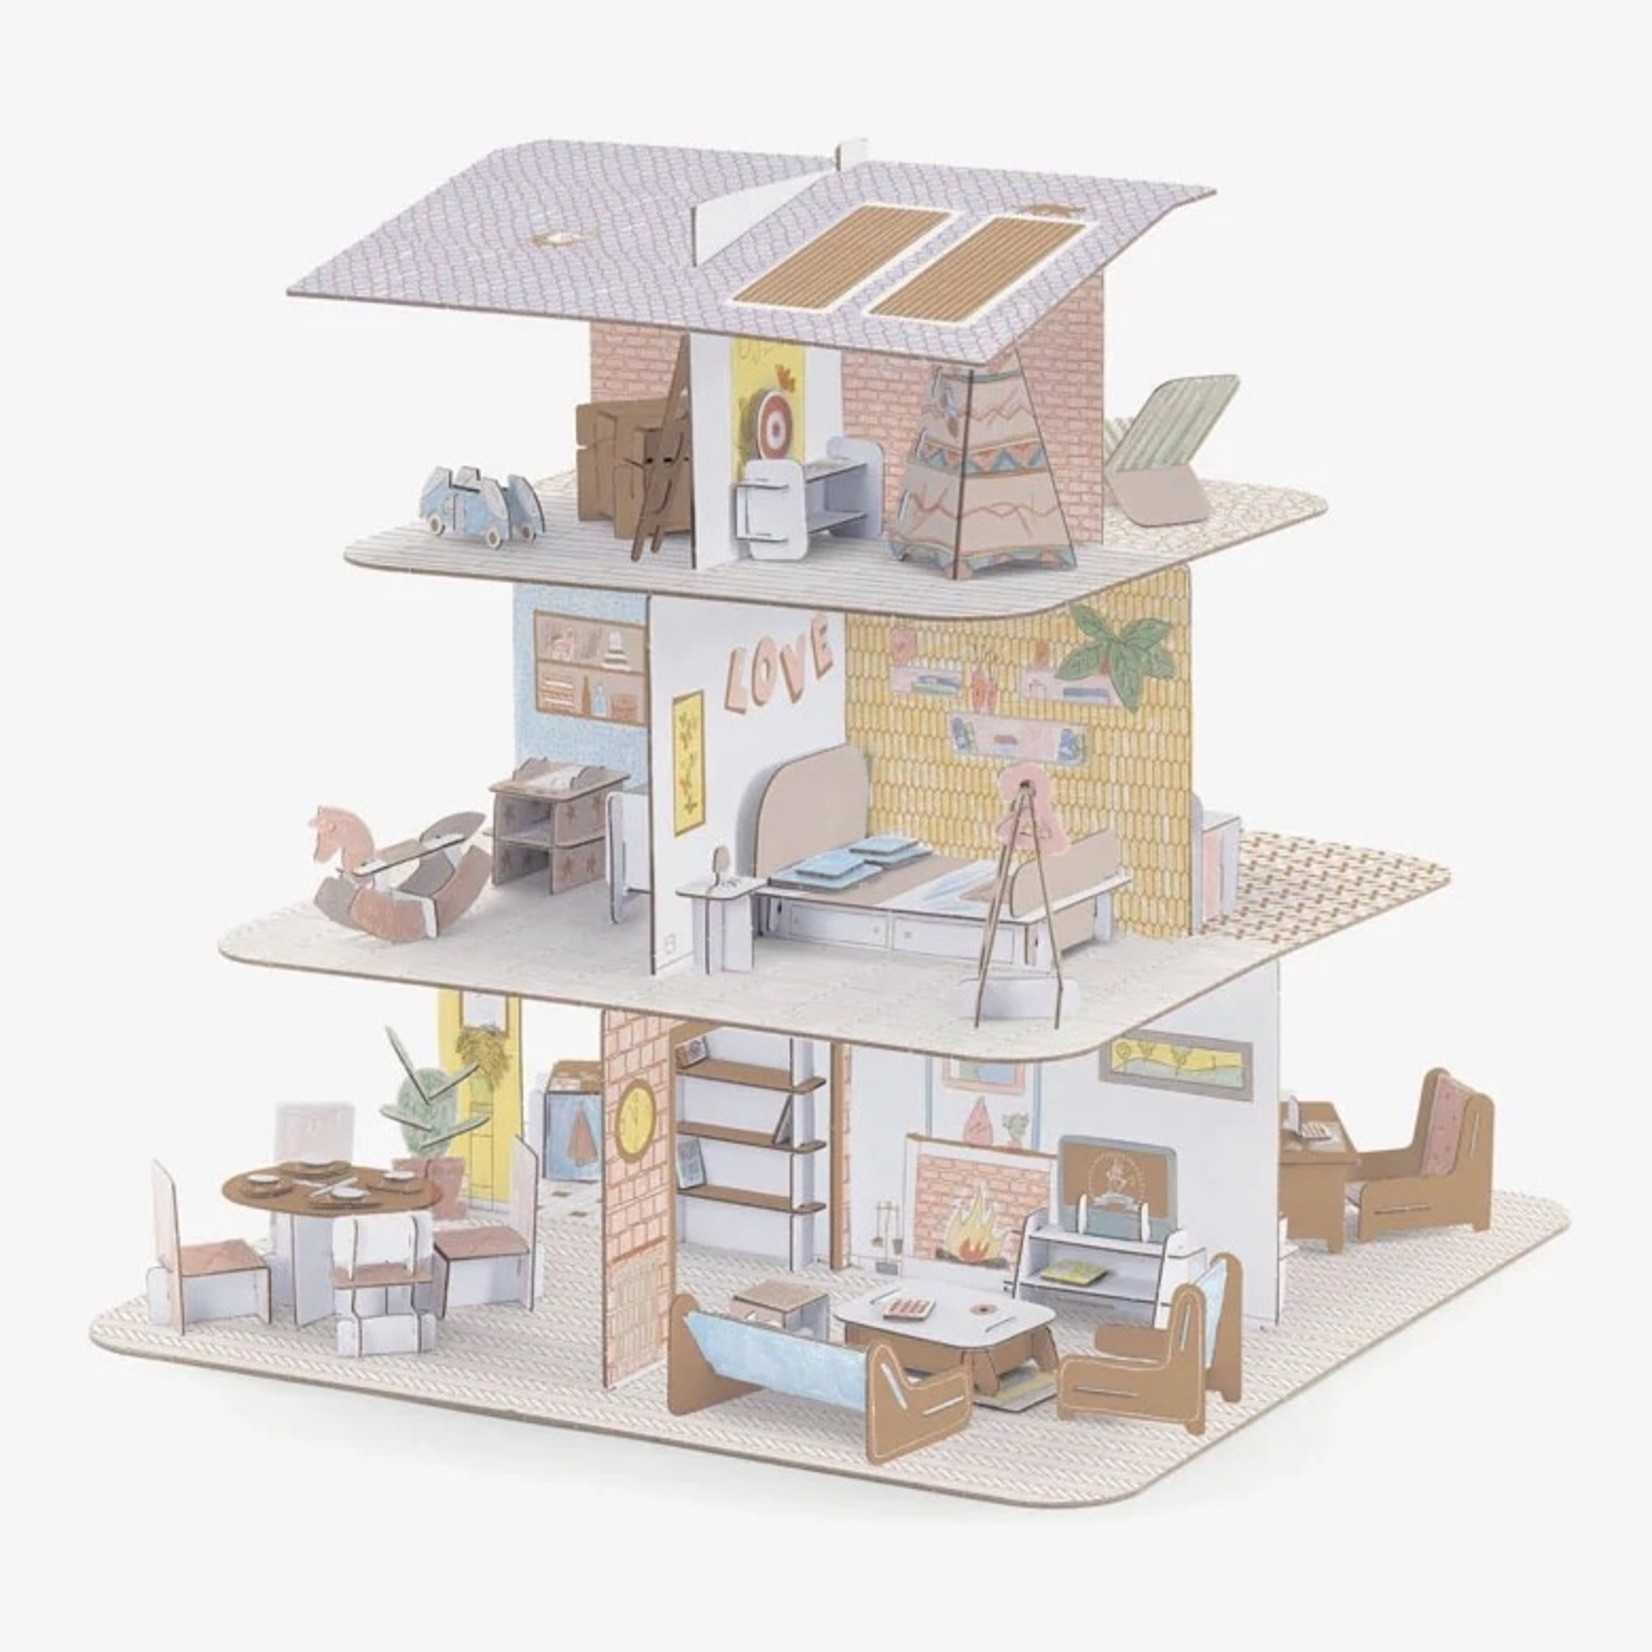 Djeco Doll House - Color, Assemble, & Play